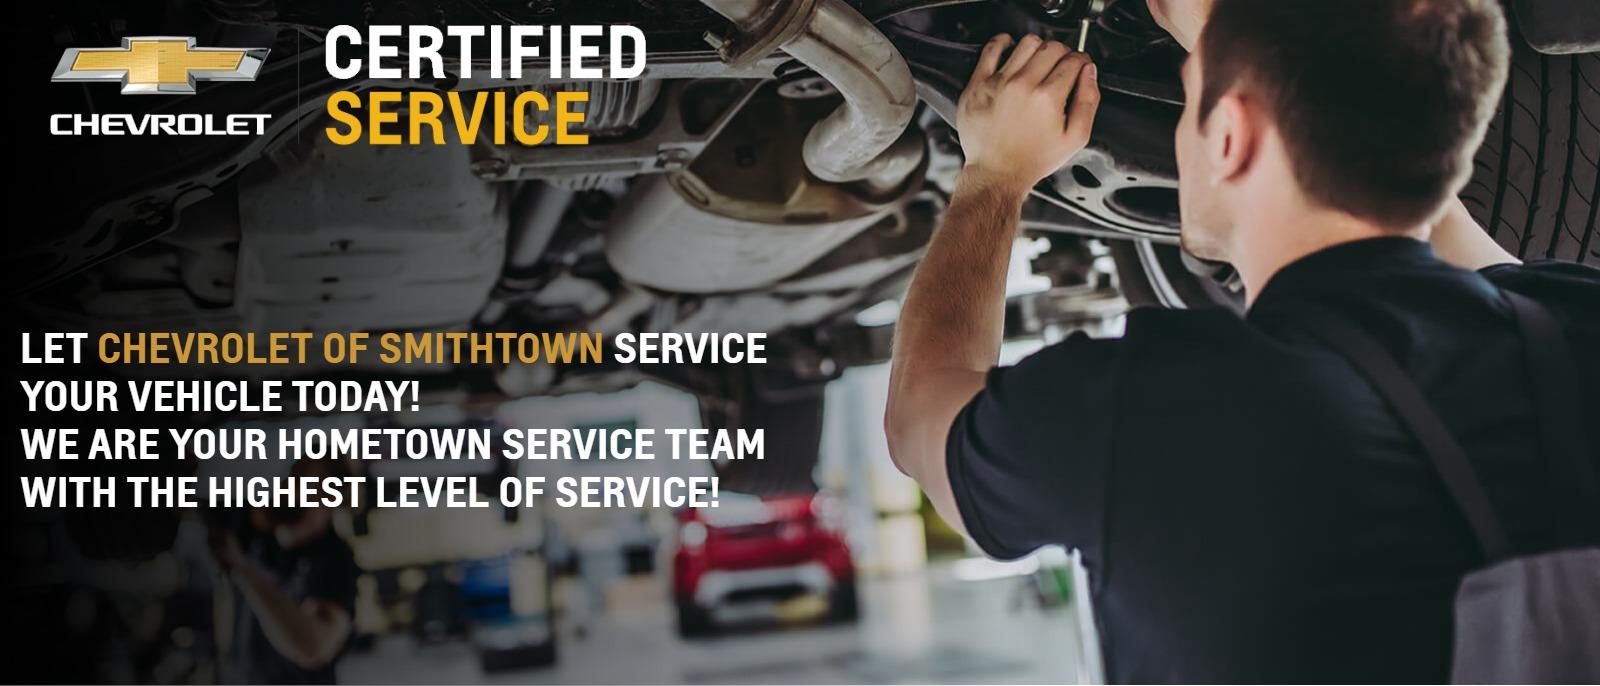 LET US SERVICE YOUR VEHICLE!
CHECK OUT OUR SERVICE SPECIALS AND MAKE AN APPOINTMENT WITH US